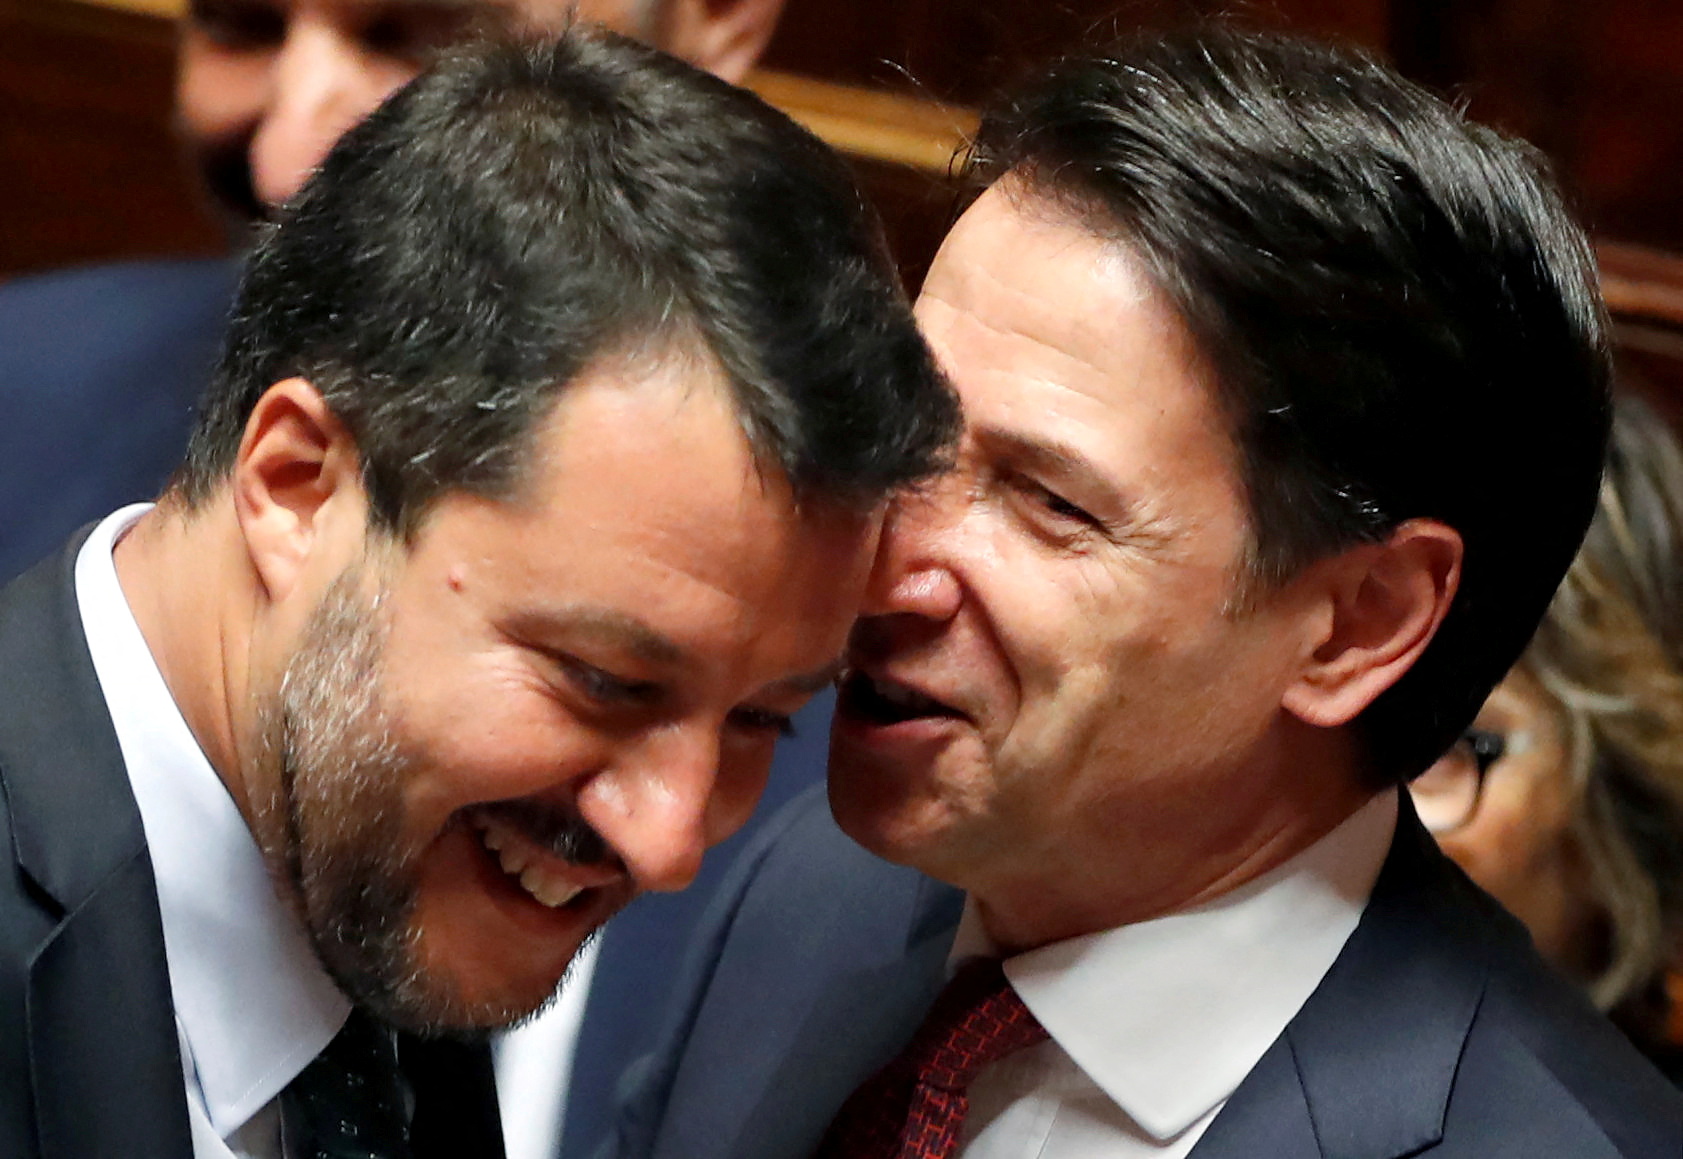 Italian Prime Minister Giuseppe Conte addresses the upper house of parliament over the ongoing government crisis, in Rome